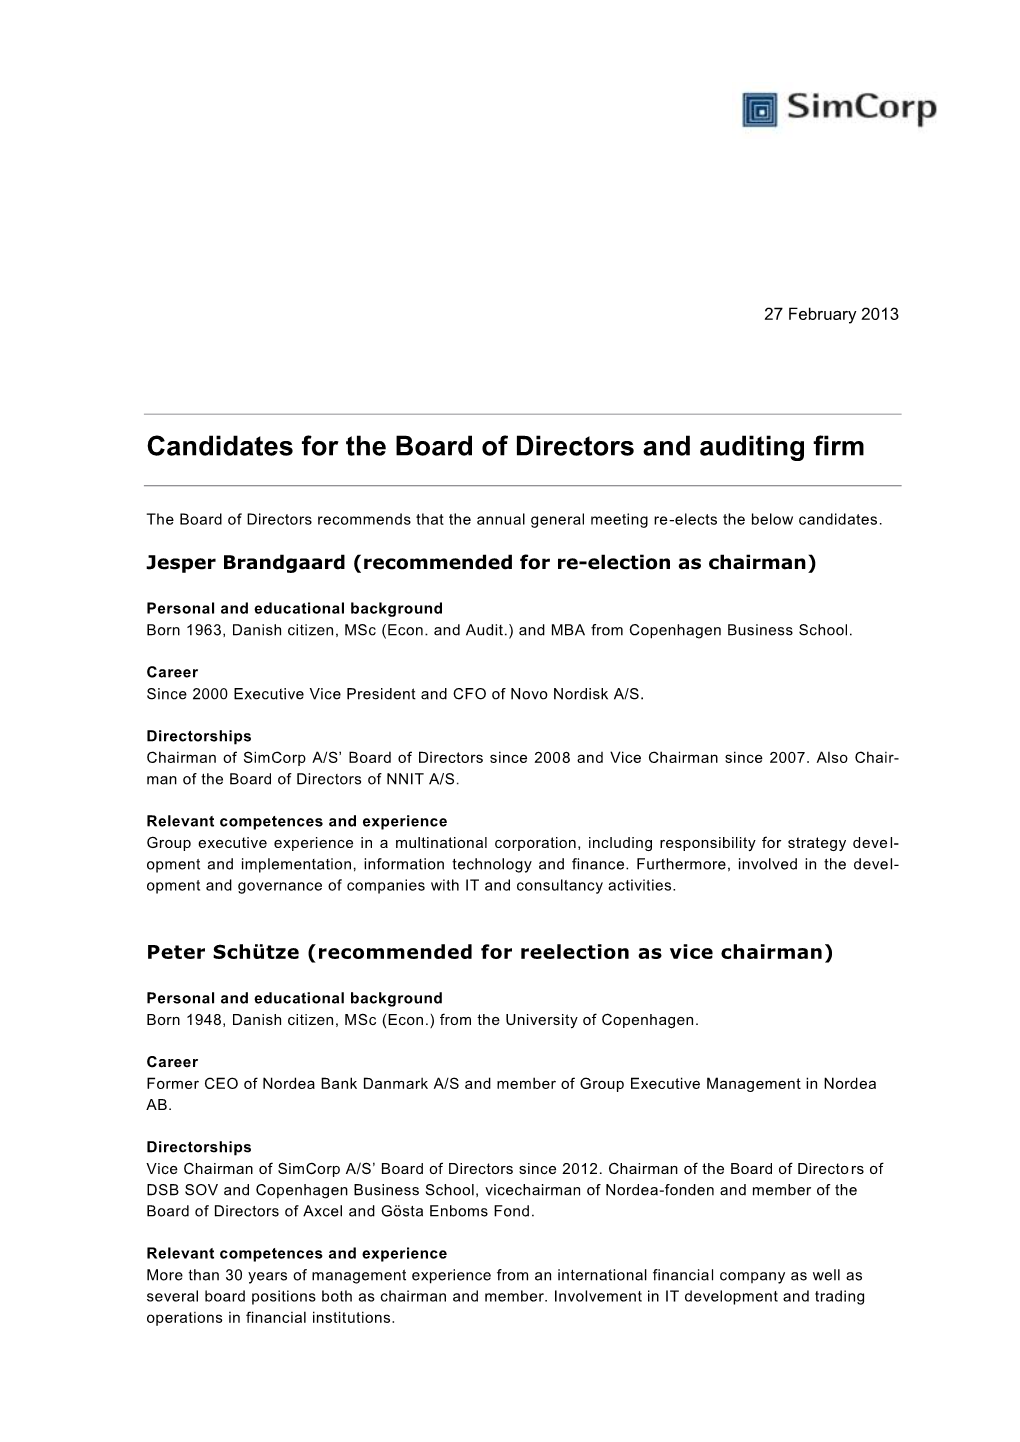 Candidates for the Board of Directors and Auditing Firm